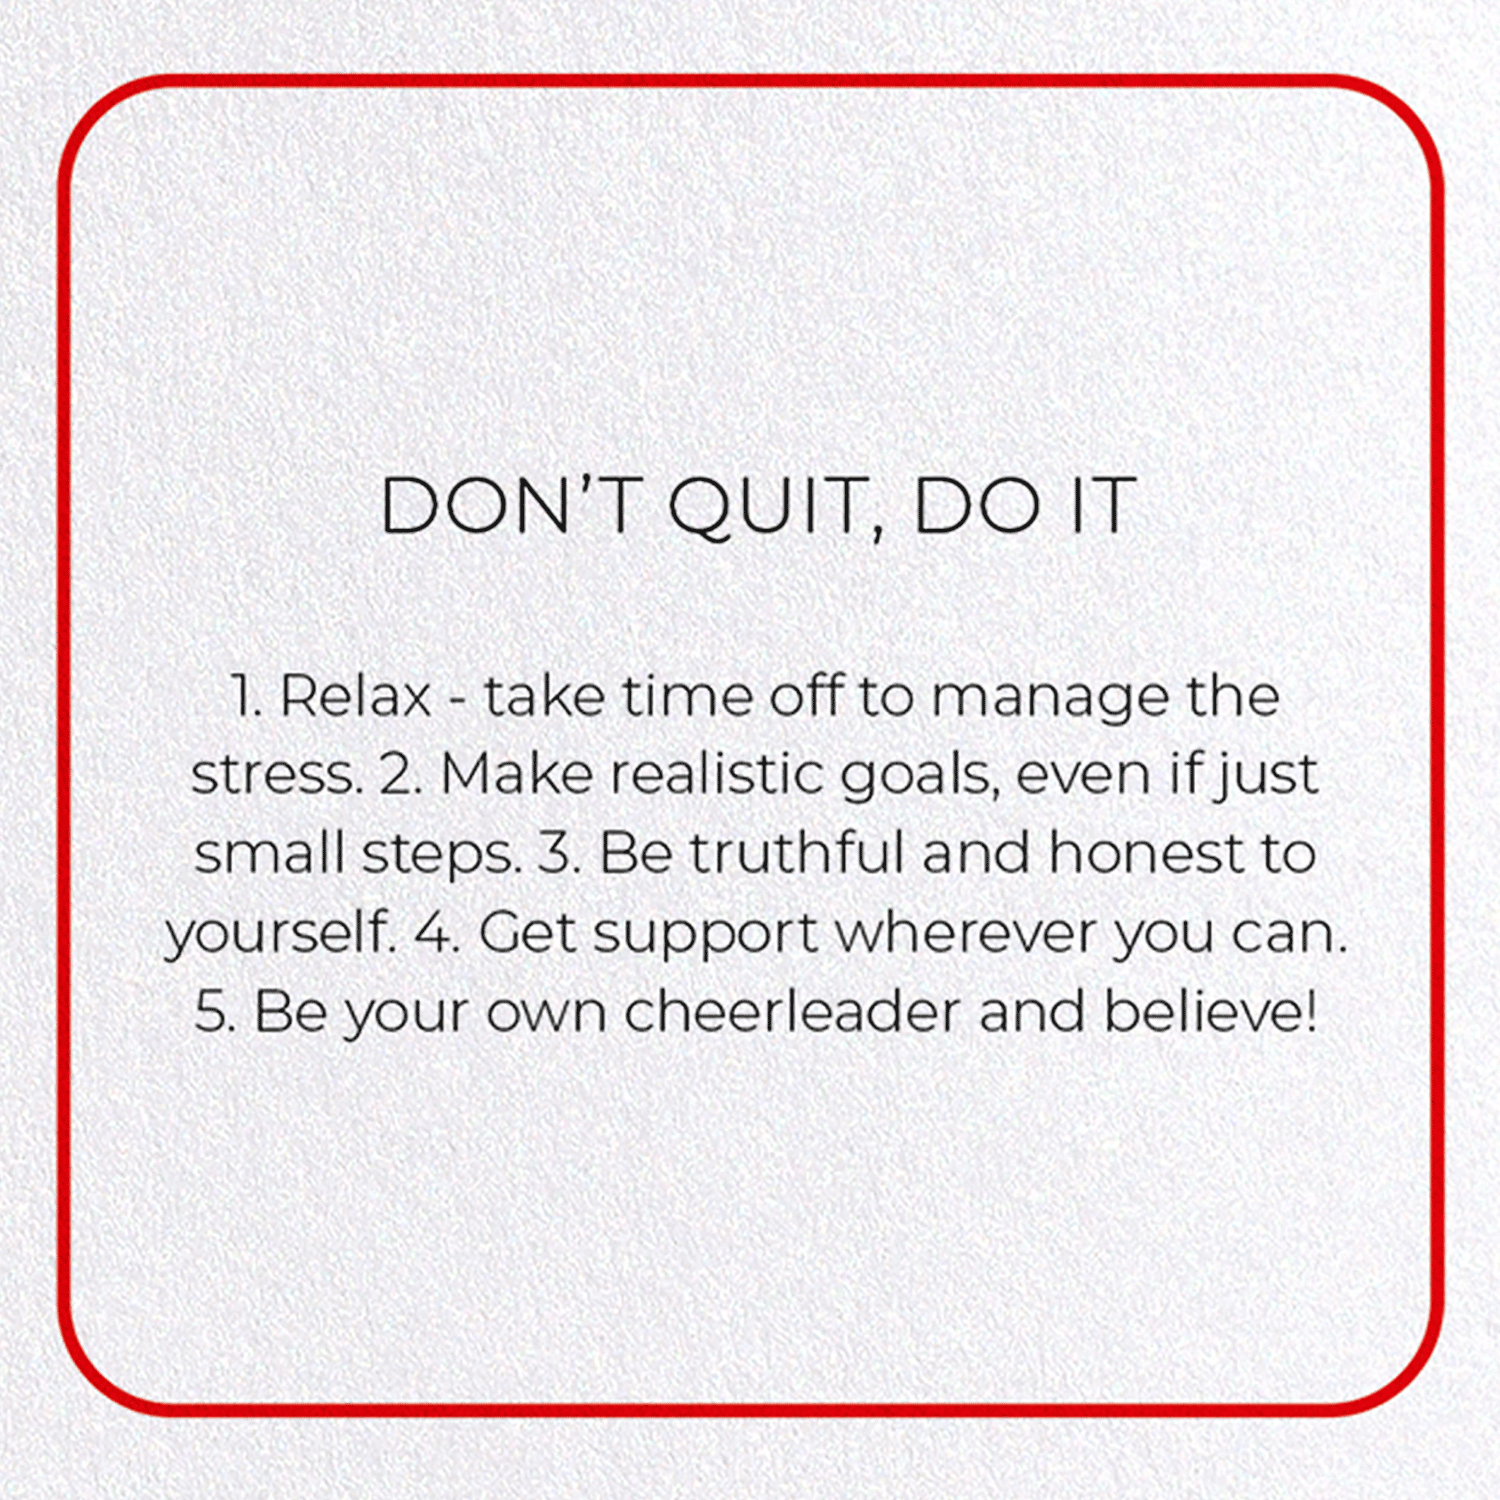 DON’T QUIT, DO IT: Photo Greeting Card